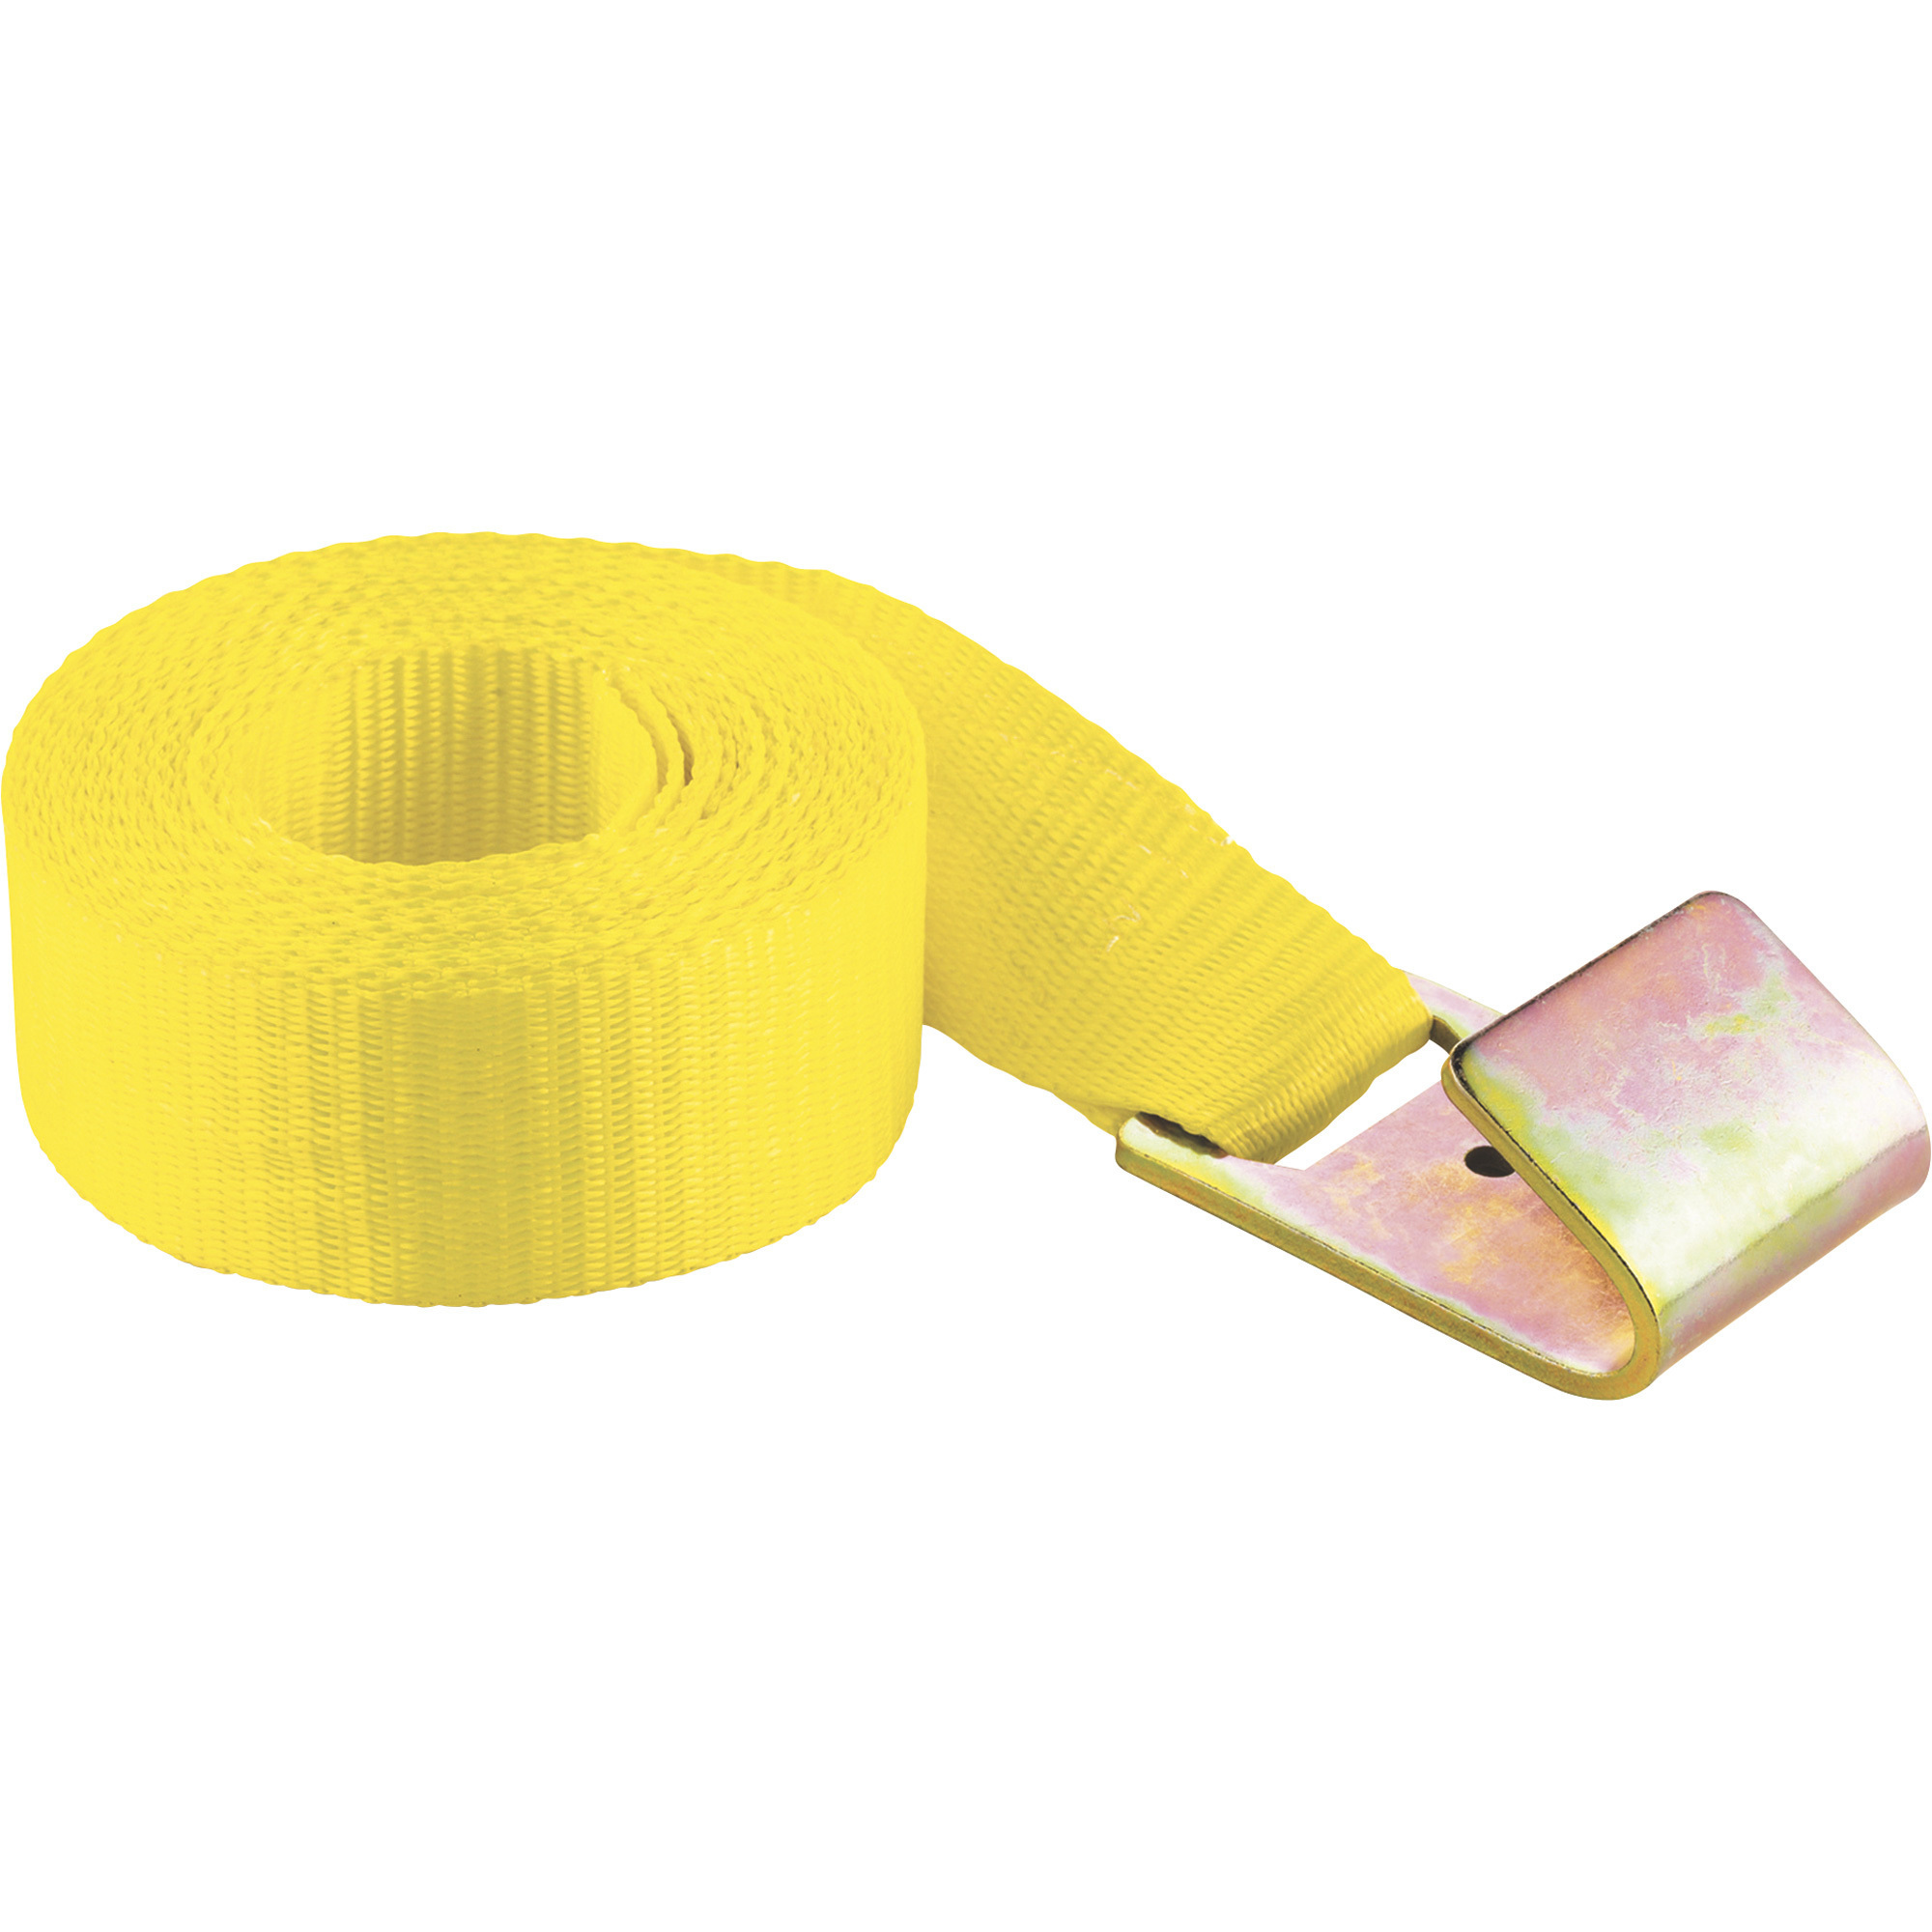 SmartStraps Winch Strap with Flat Hook, 20ft.L x 2Inch W, 5,000-Lb. Capacity, Yellow, Model 281